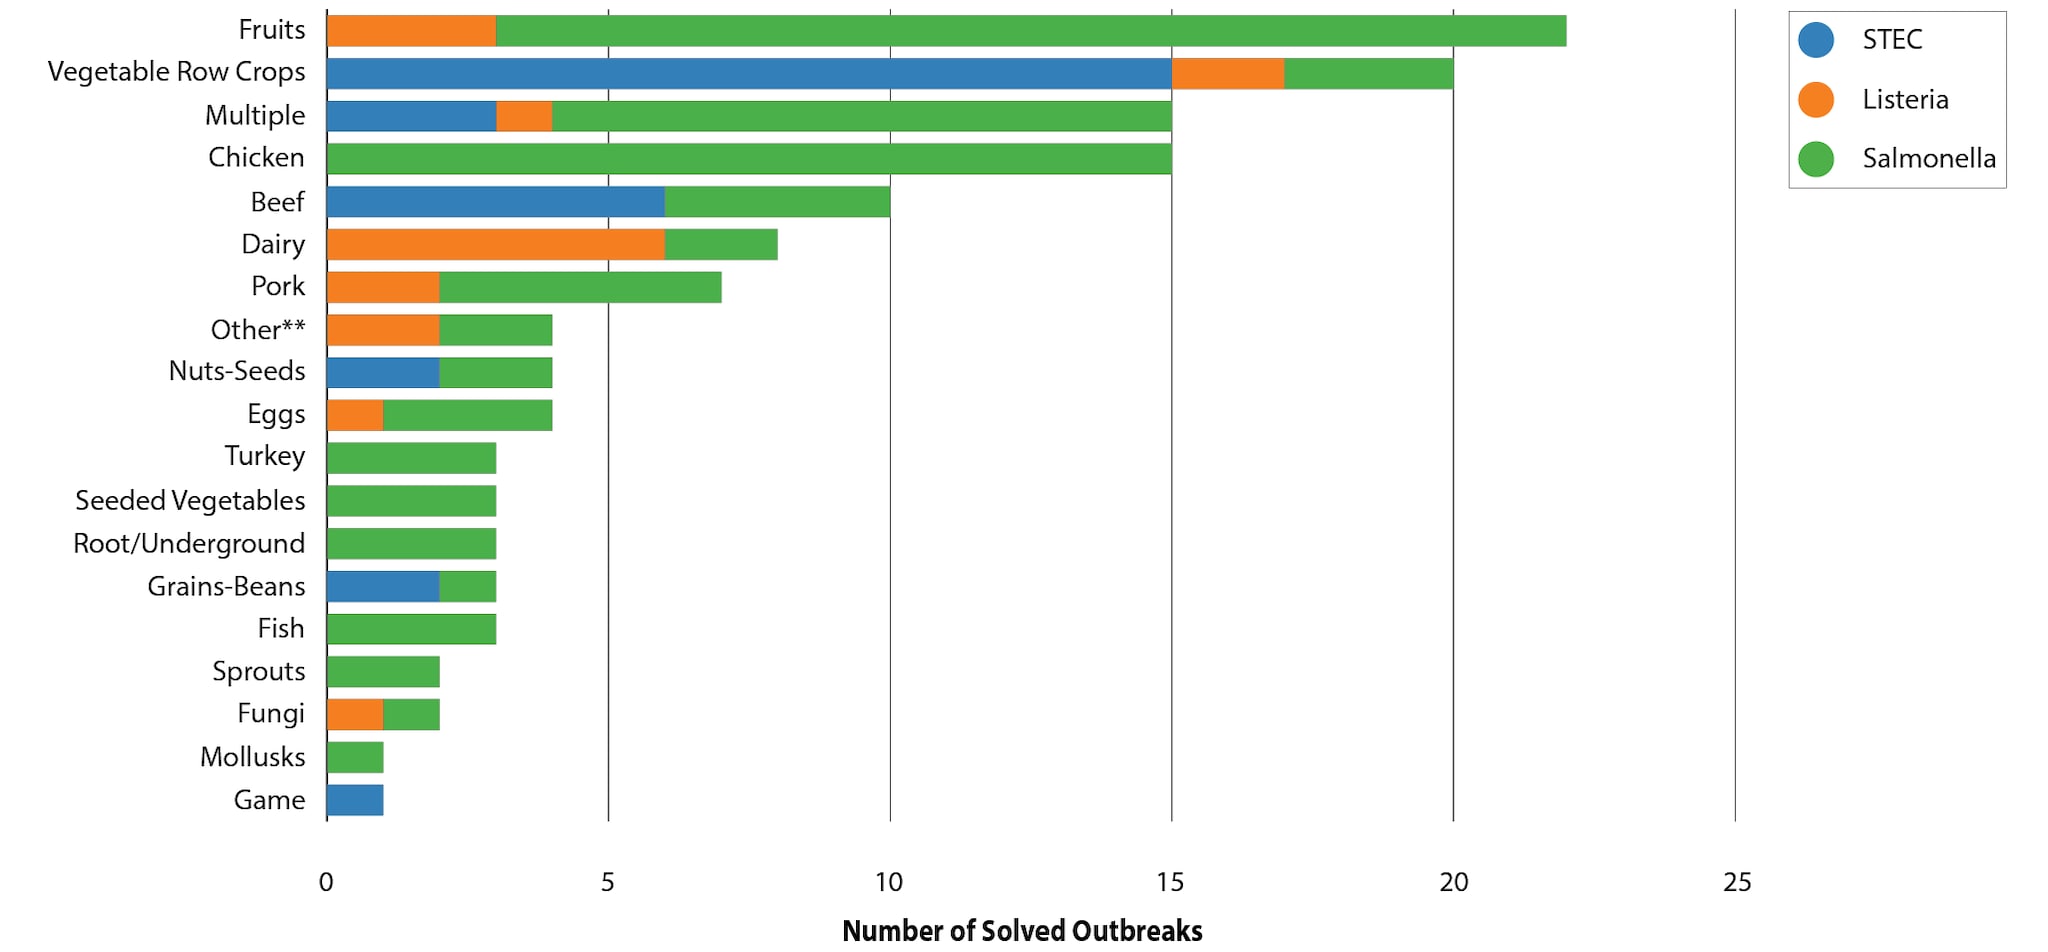 Figure 7: Solved Multistate Foodborne Outbreaks by Food Category, 2017–2020